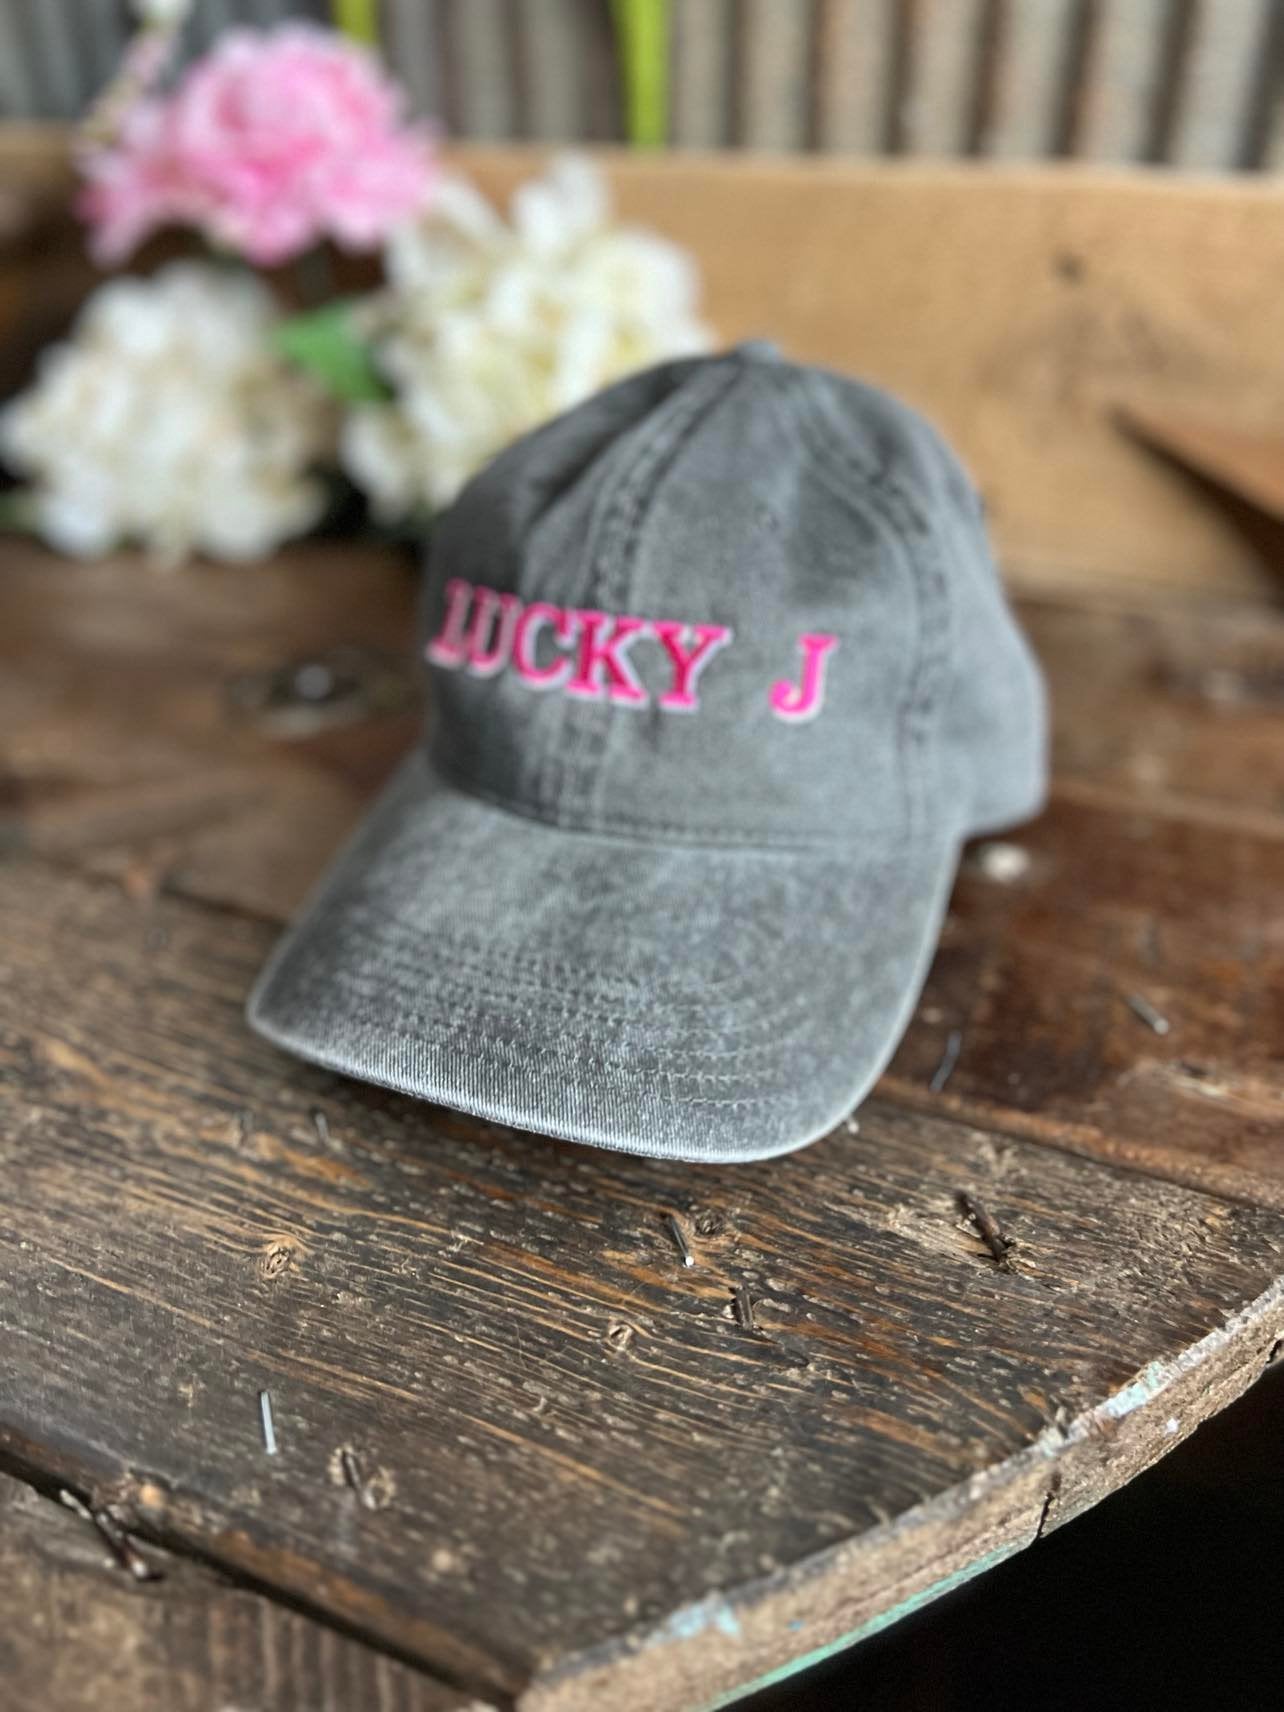 LJ Womens Caps-Women's Hats-Embassy-Lucky J Boots & More, Women's, Men's, & Kids Western Store Located in Carthage, MO